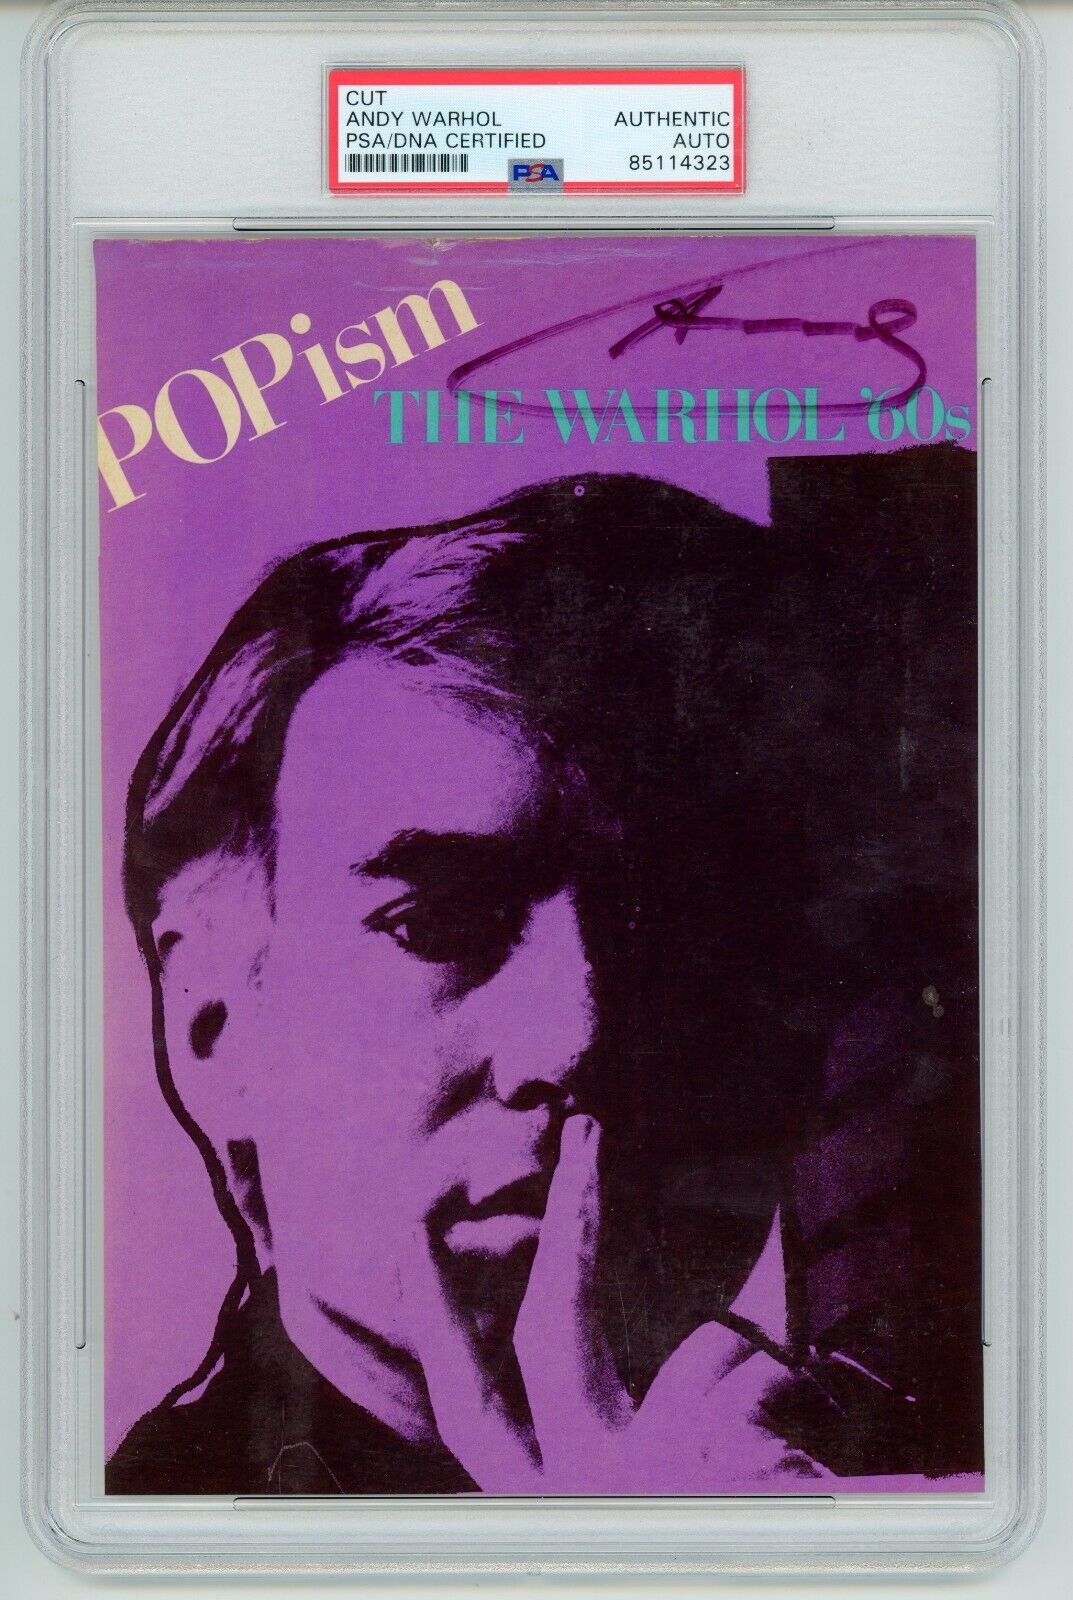 Andy Warhol ~ Signed Autographed Popism The Warhol \'60\'s Book Cover ~ PSA DNA